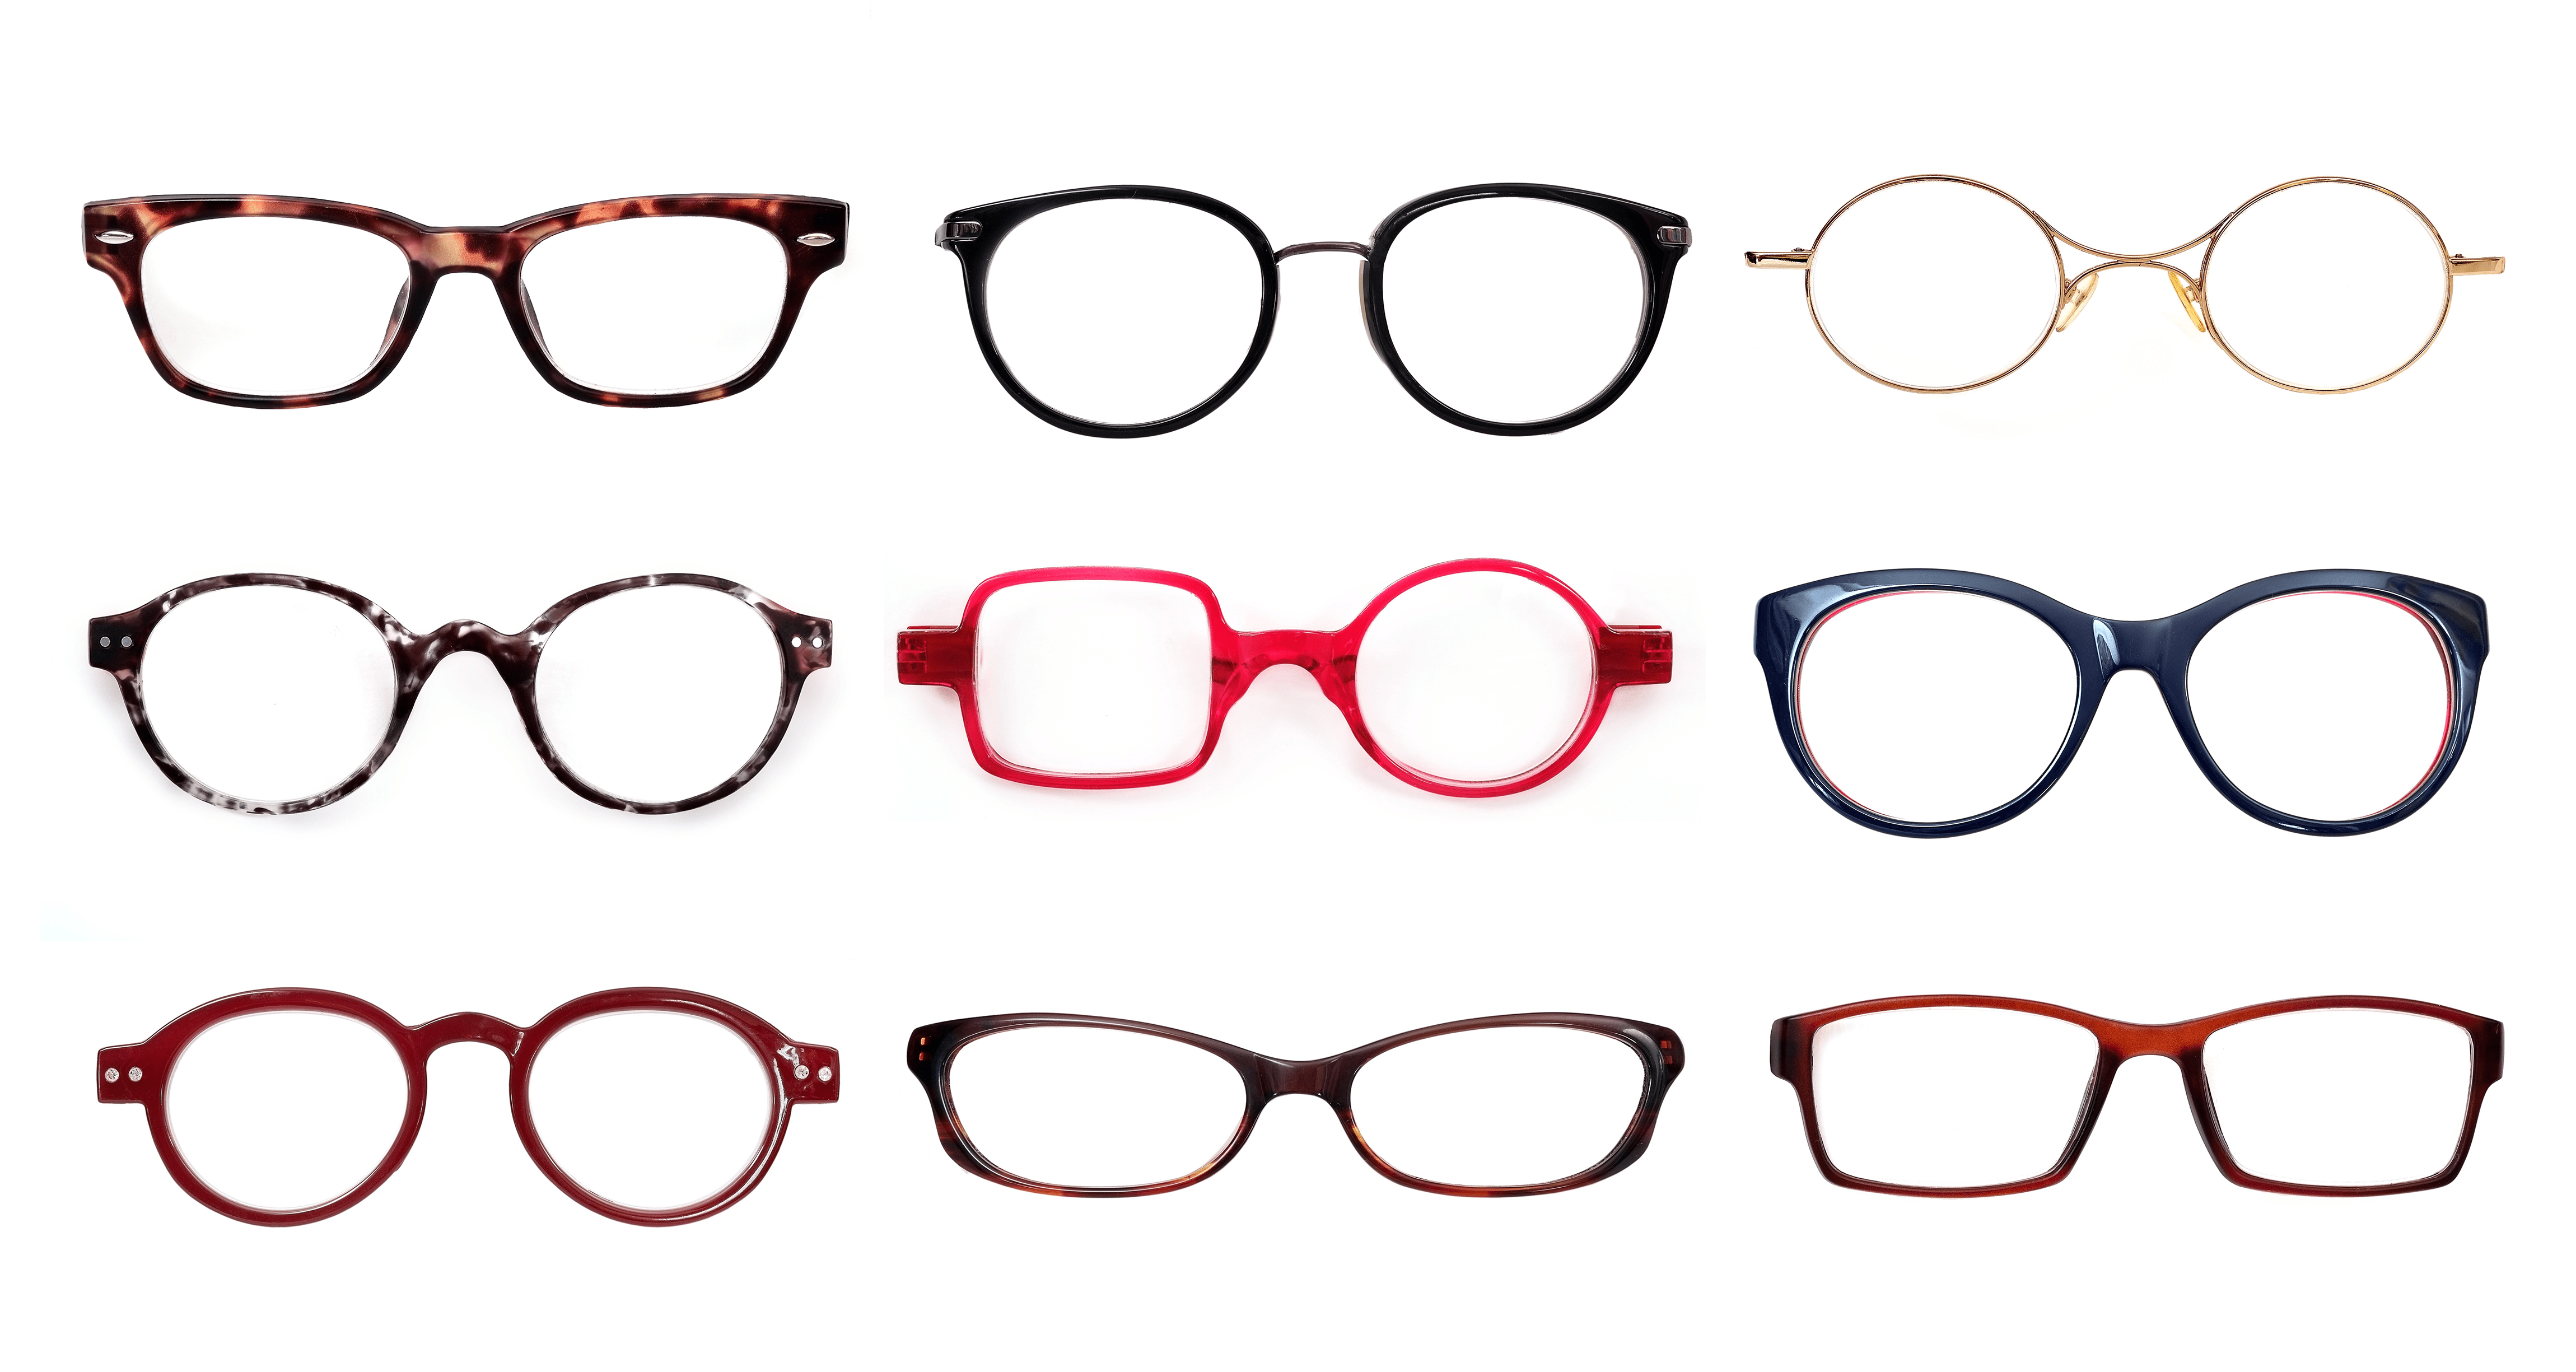 A collection of different colored glasses